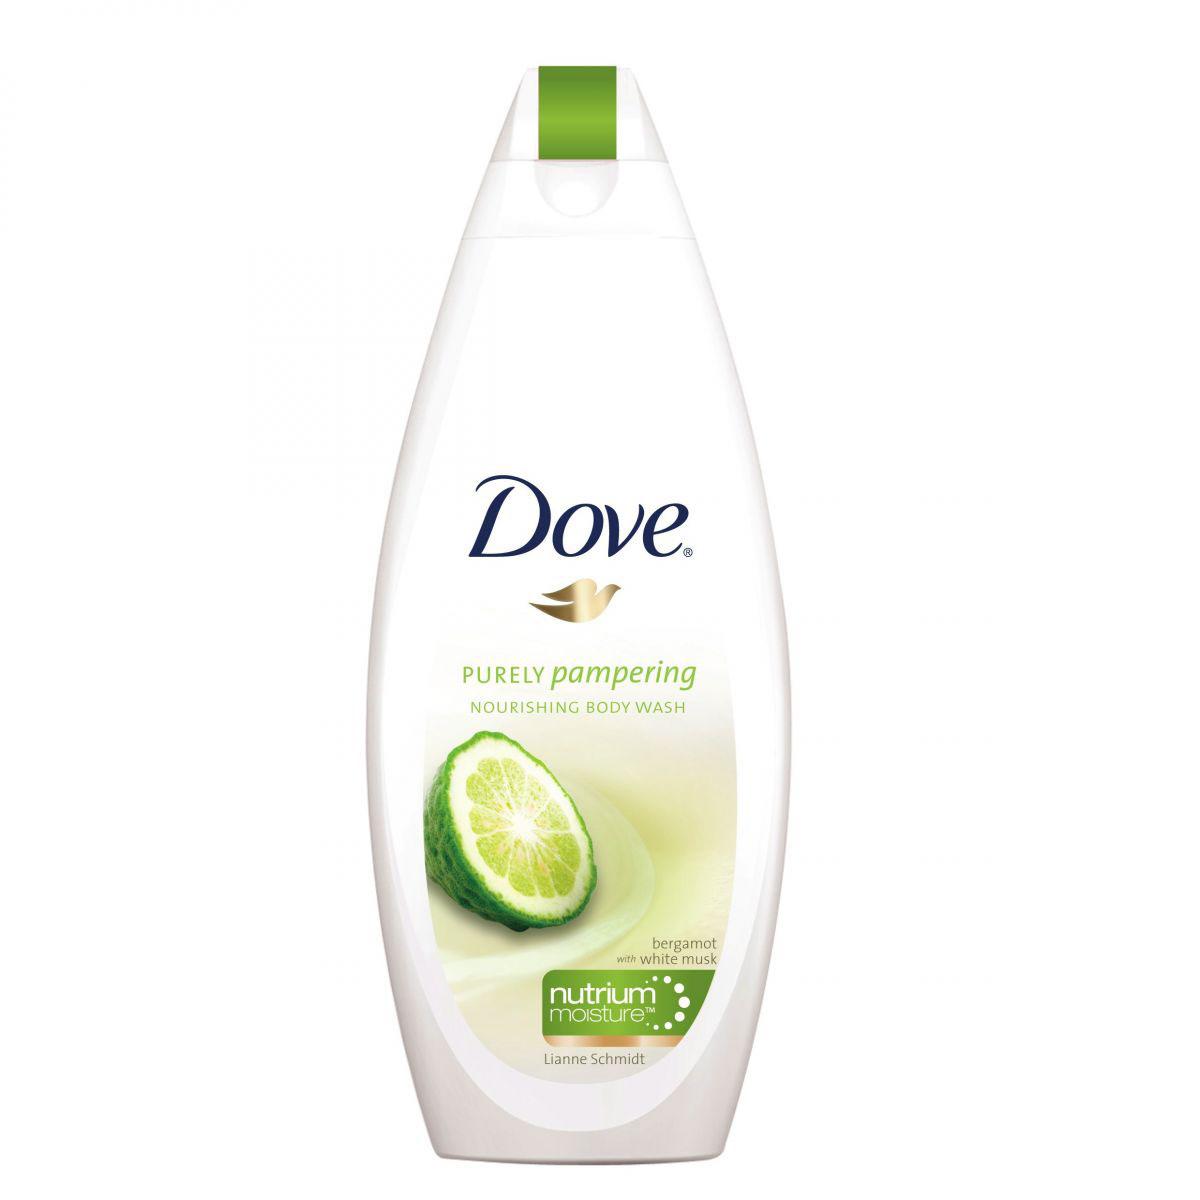 Dove Purely Pampering - €2.60